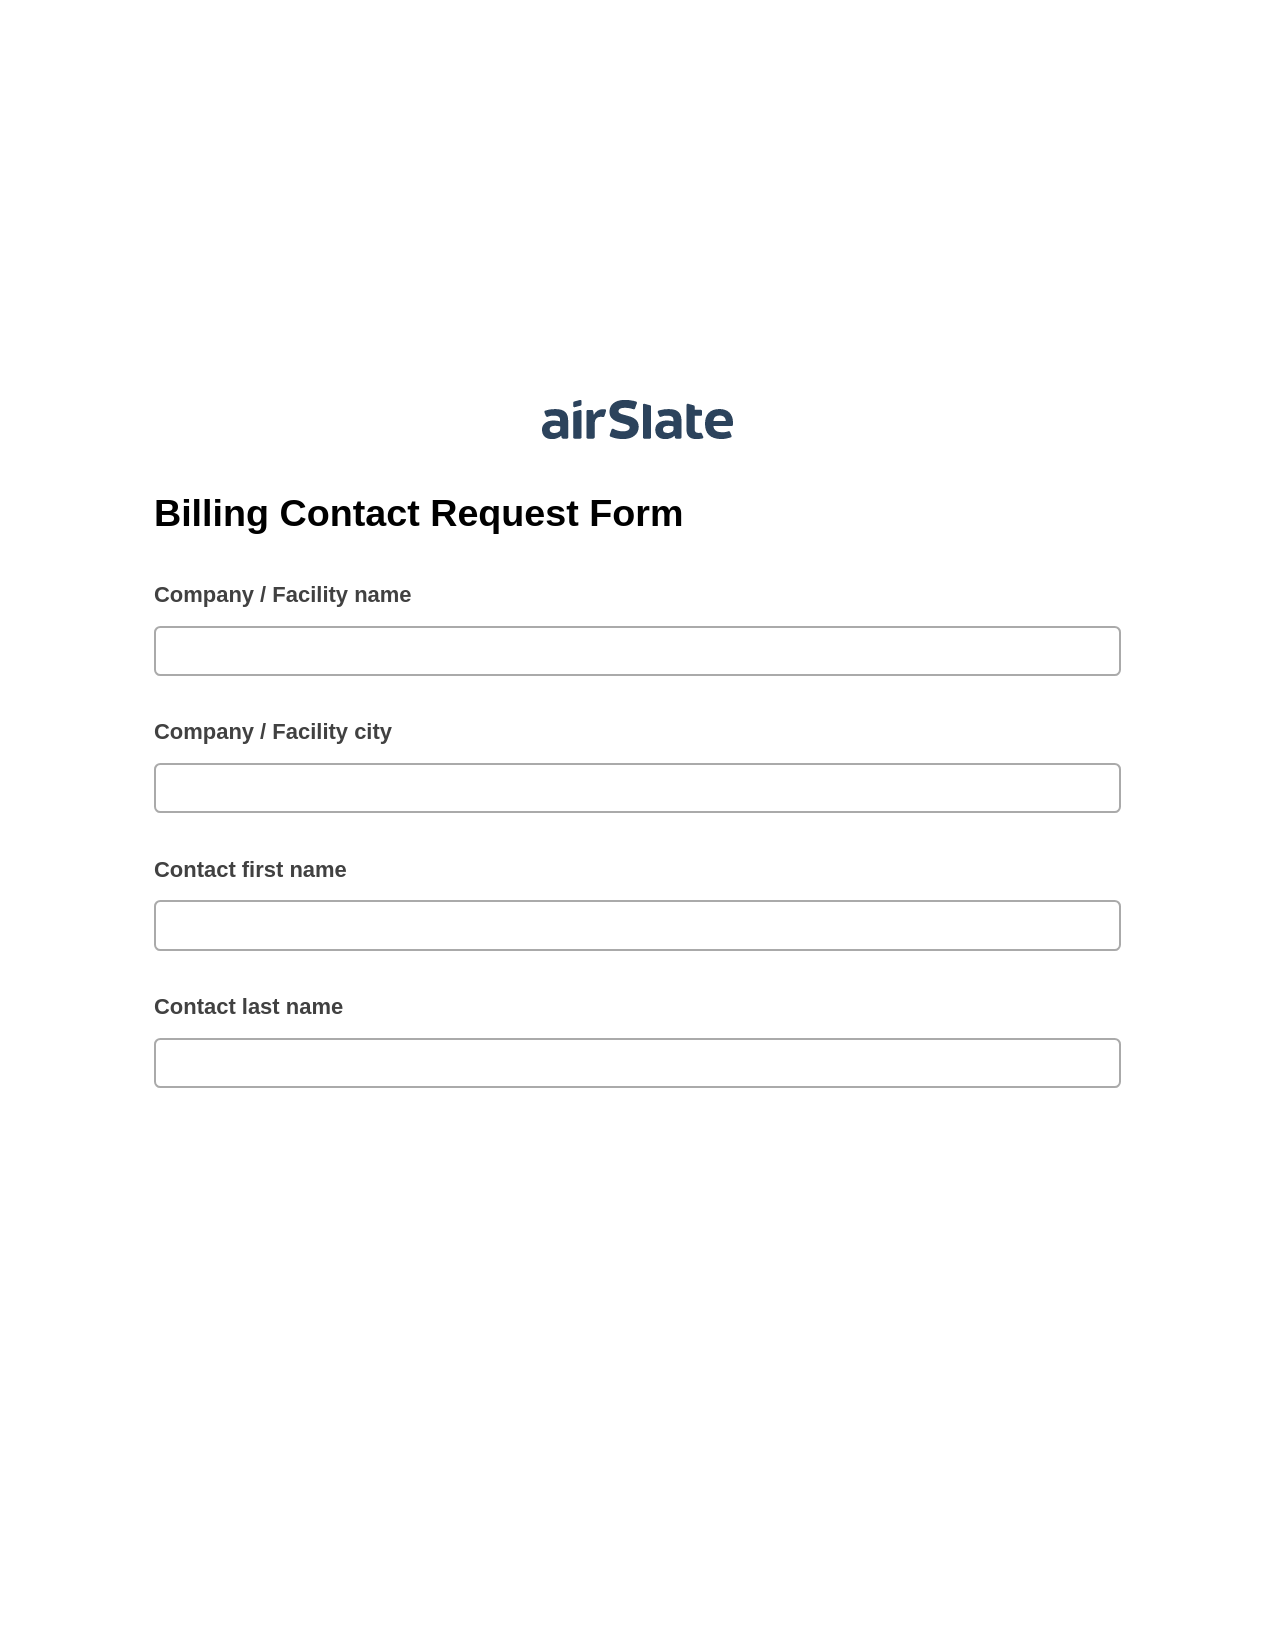 Multirole Billing Contact Request Form Pre-fill from Salesforce Record Bot, Hide Signatures Bot, Export to MySQL Bot